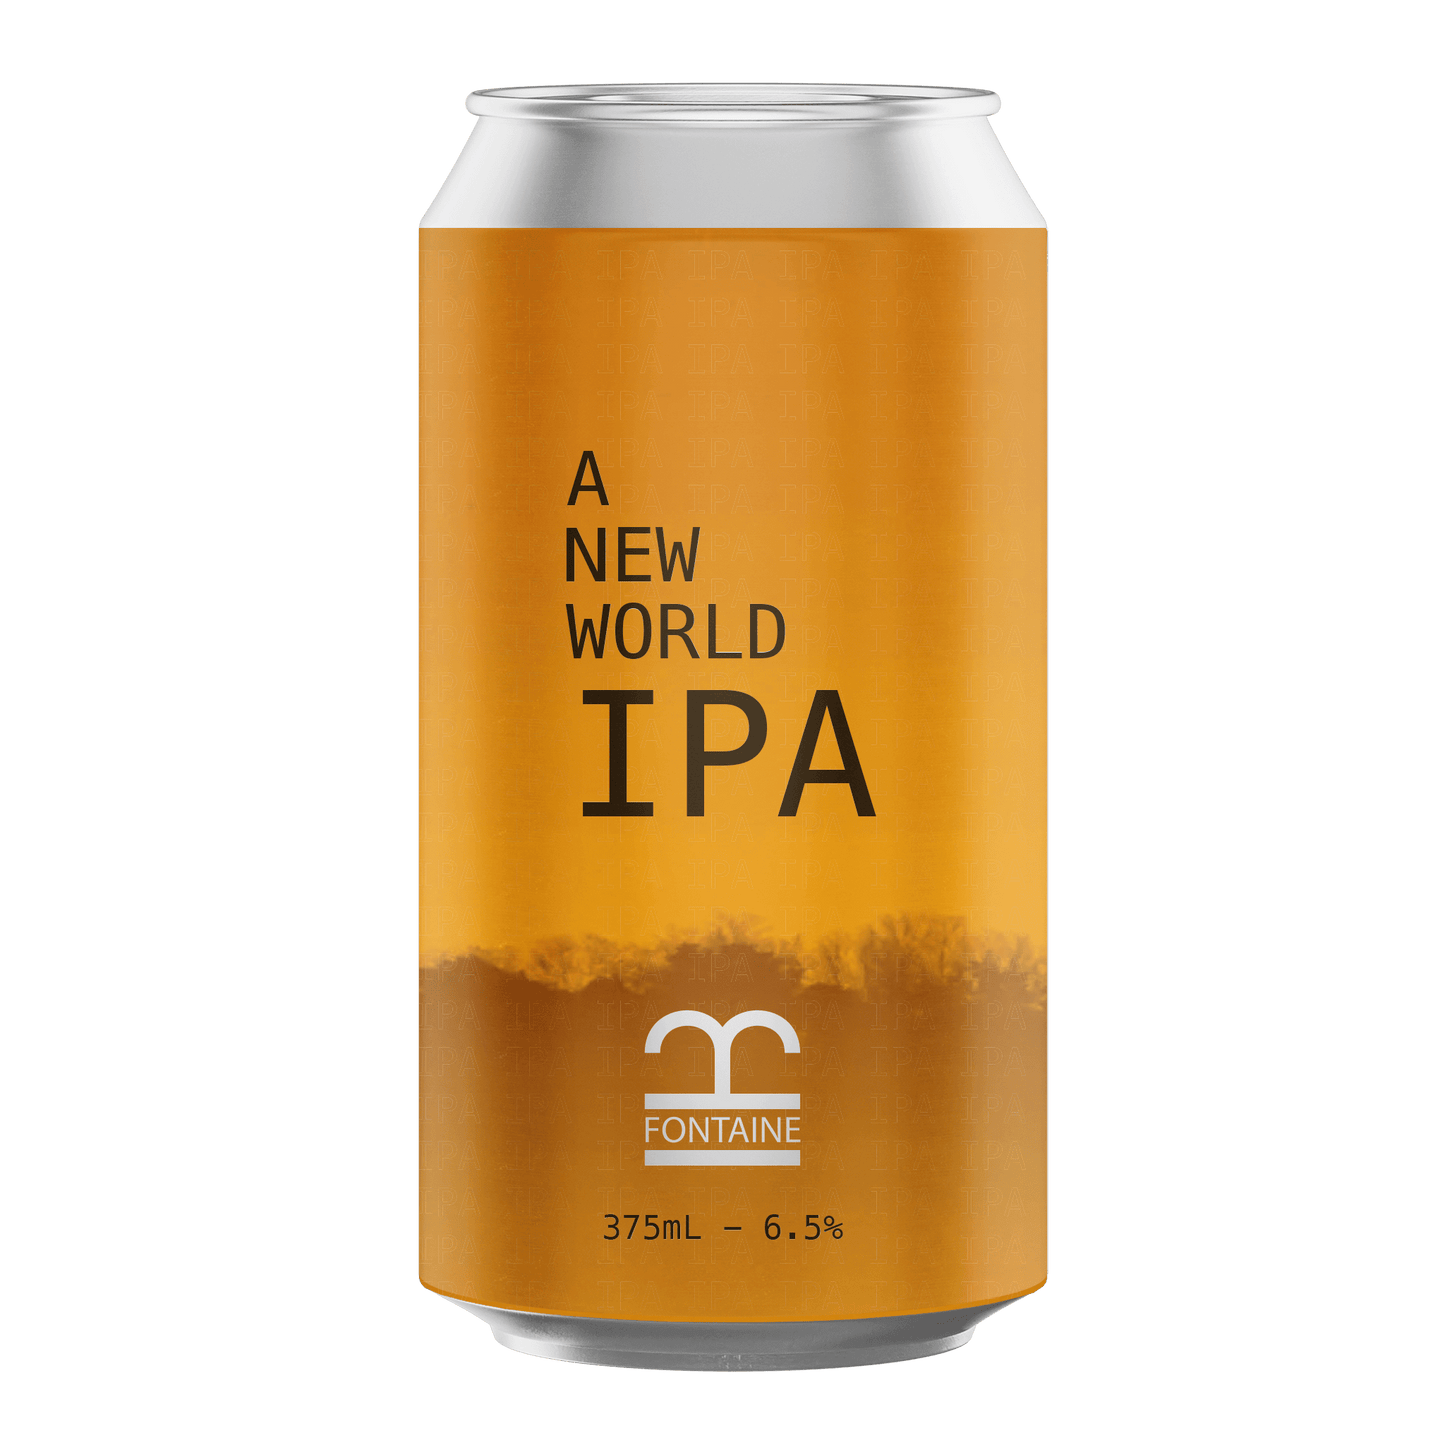 All The Coasts - A New World IPA - 375mL Can